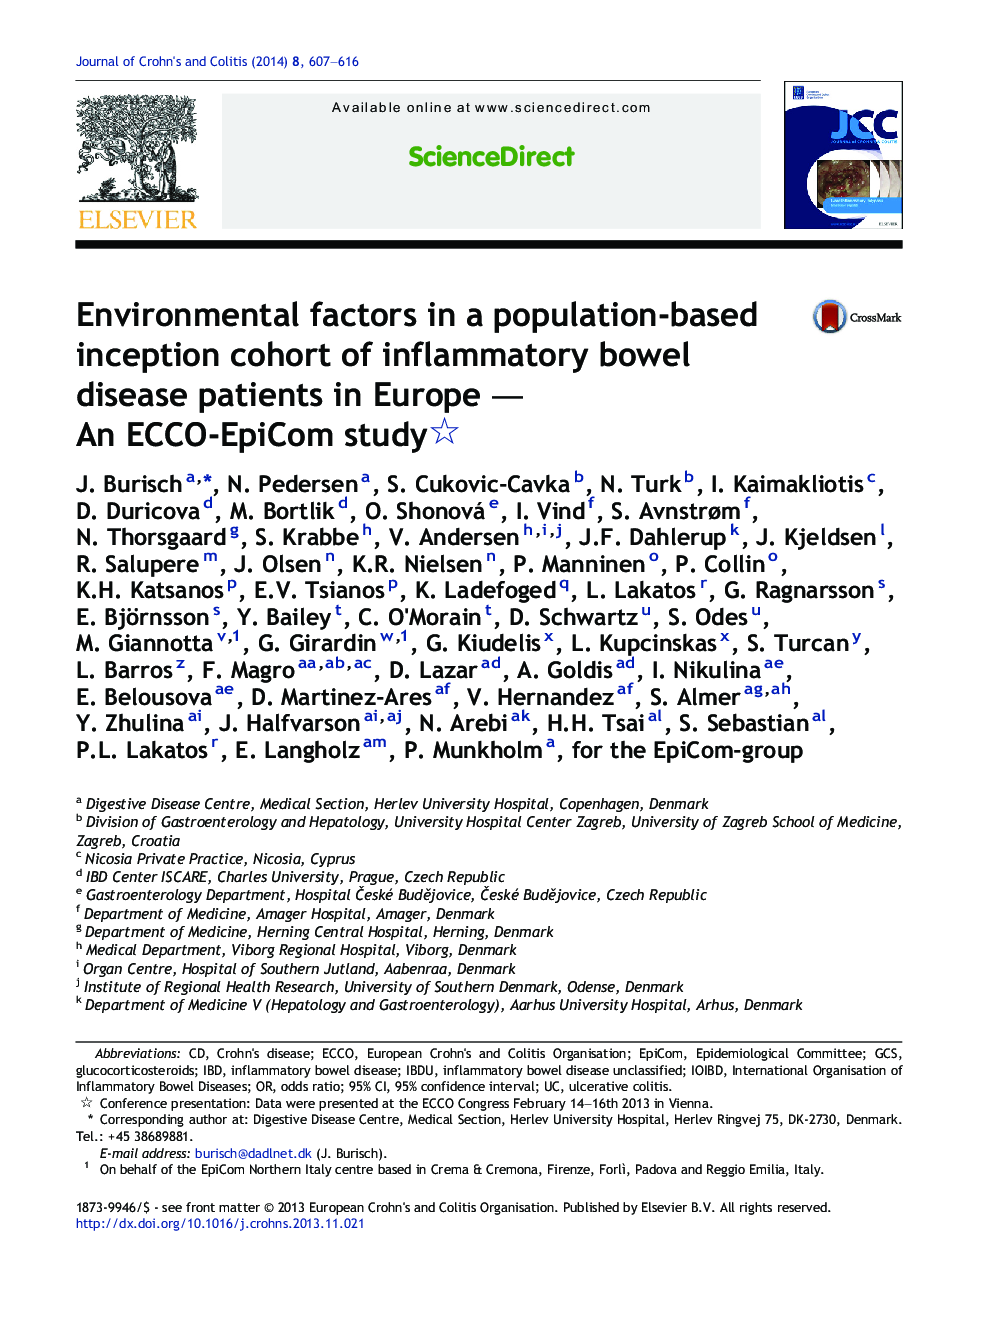 Environmental factors in a population-based inception cohort of inflammatory bowel disease patients in Europe — An ECCO-EpiCom study 